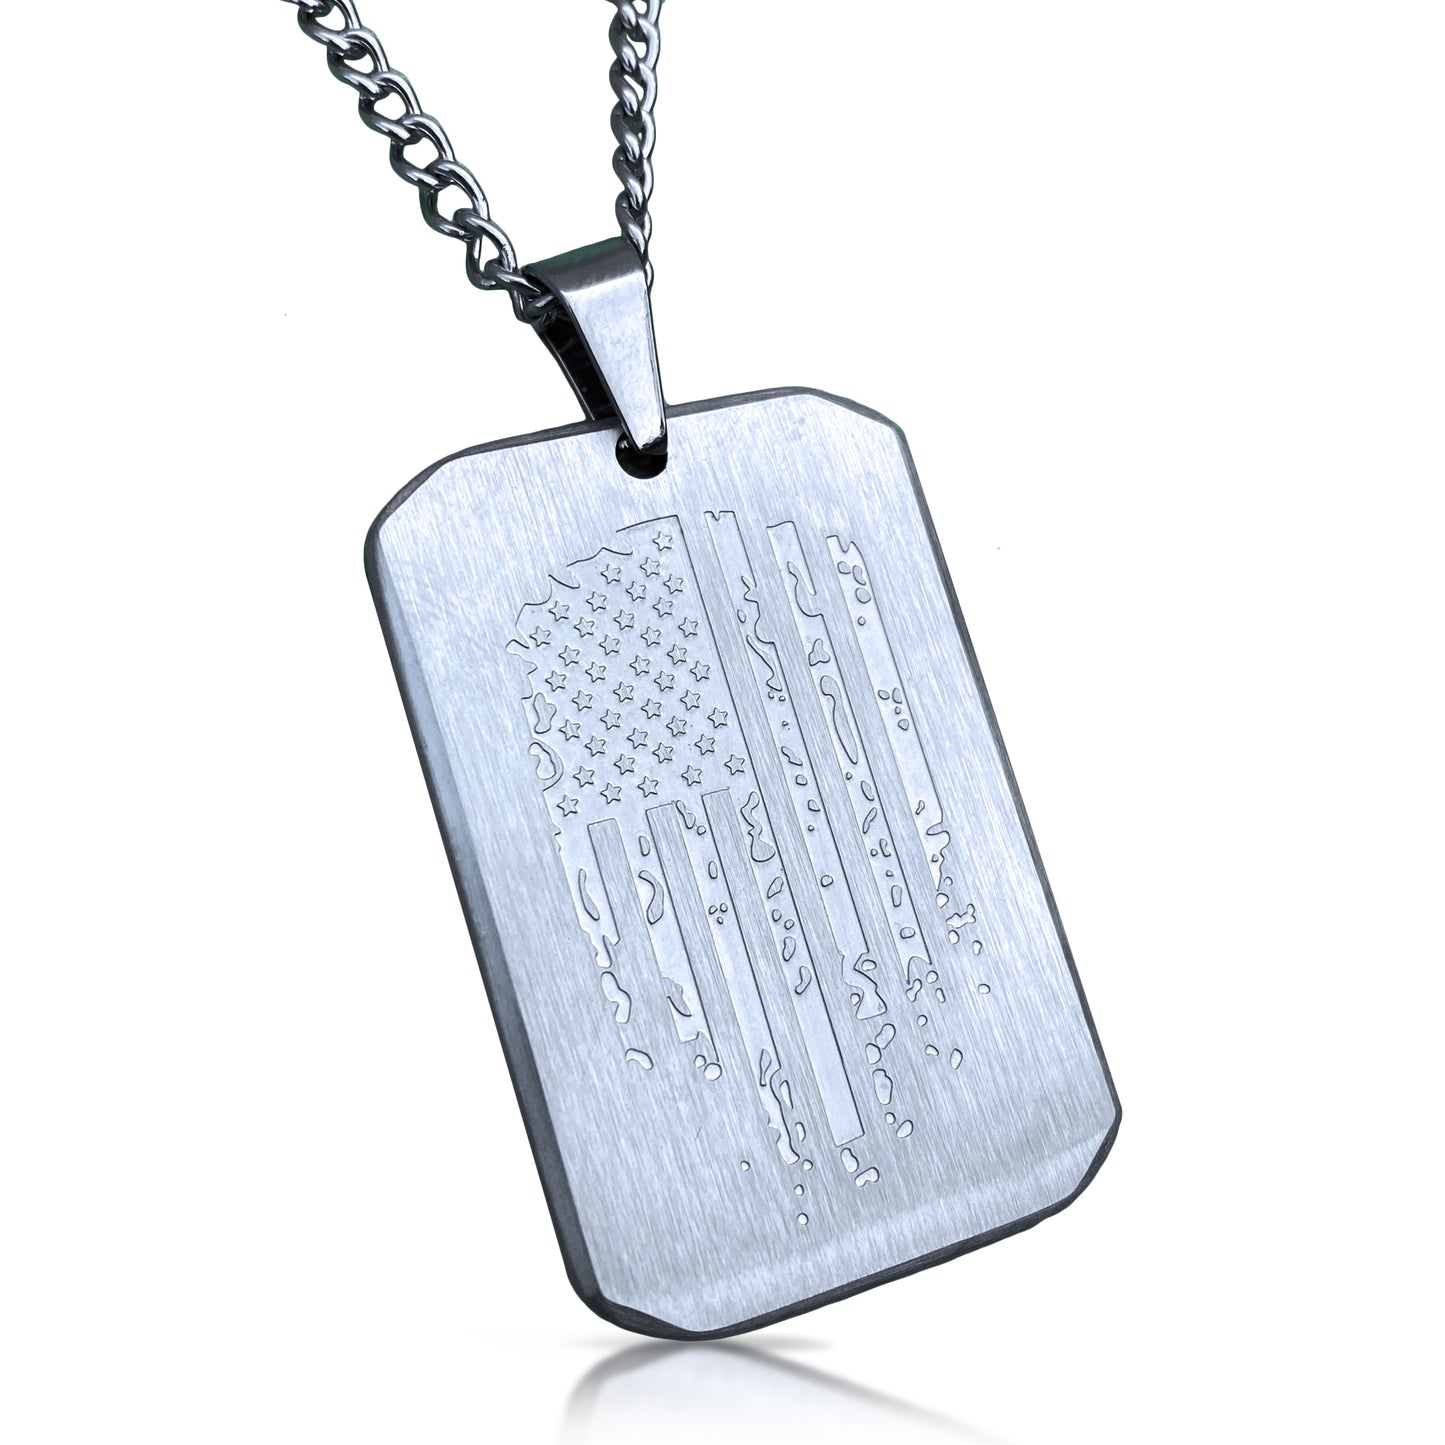 Patriot Pendant With Chain Necklace - Stainless Steel